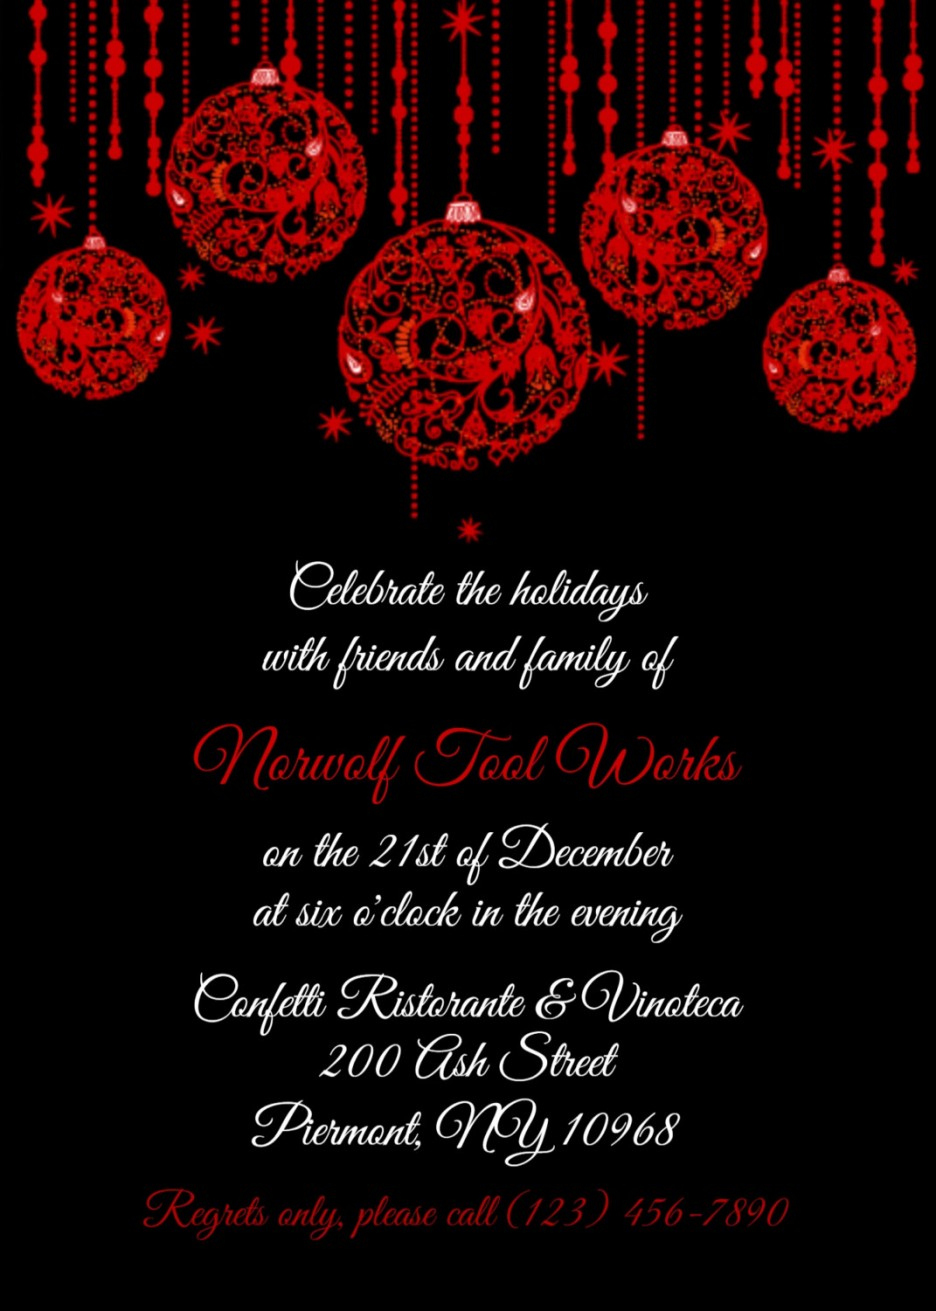 Company Christmas Party Invitation Templates Wosing Template Design within sizing 936 X 1311